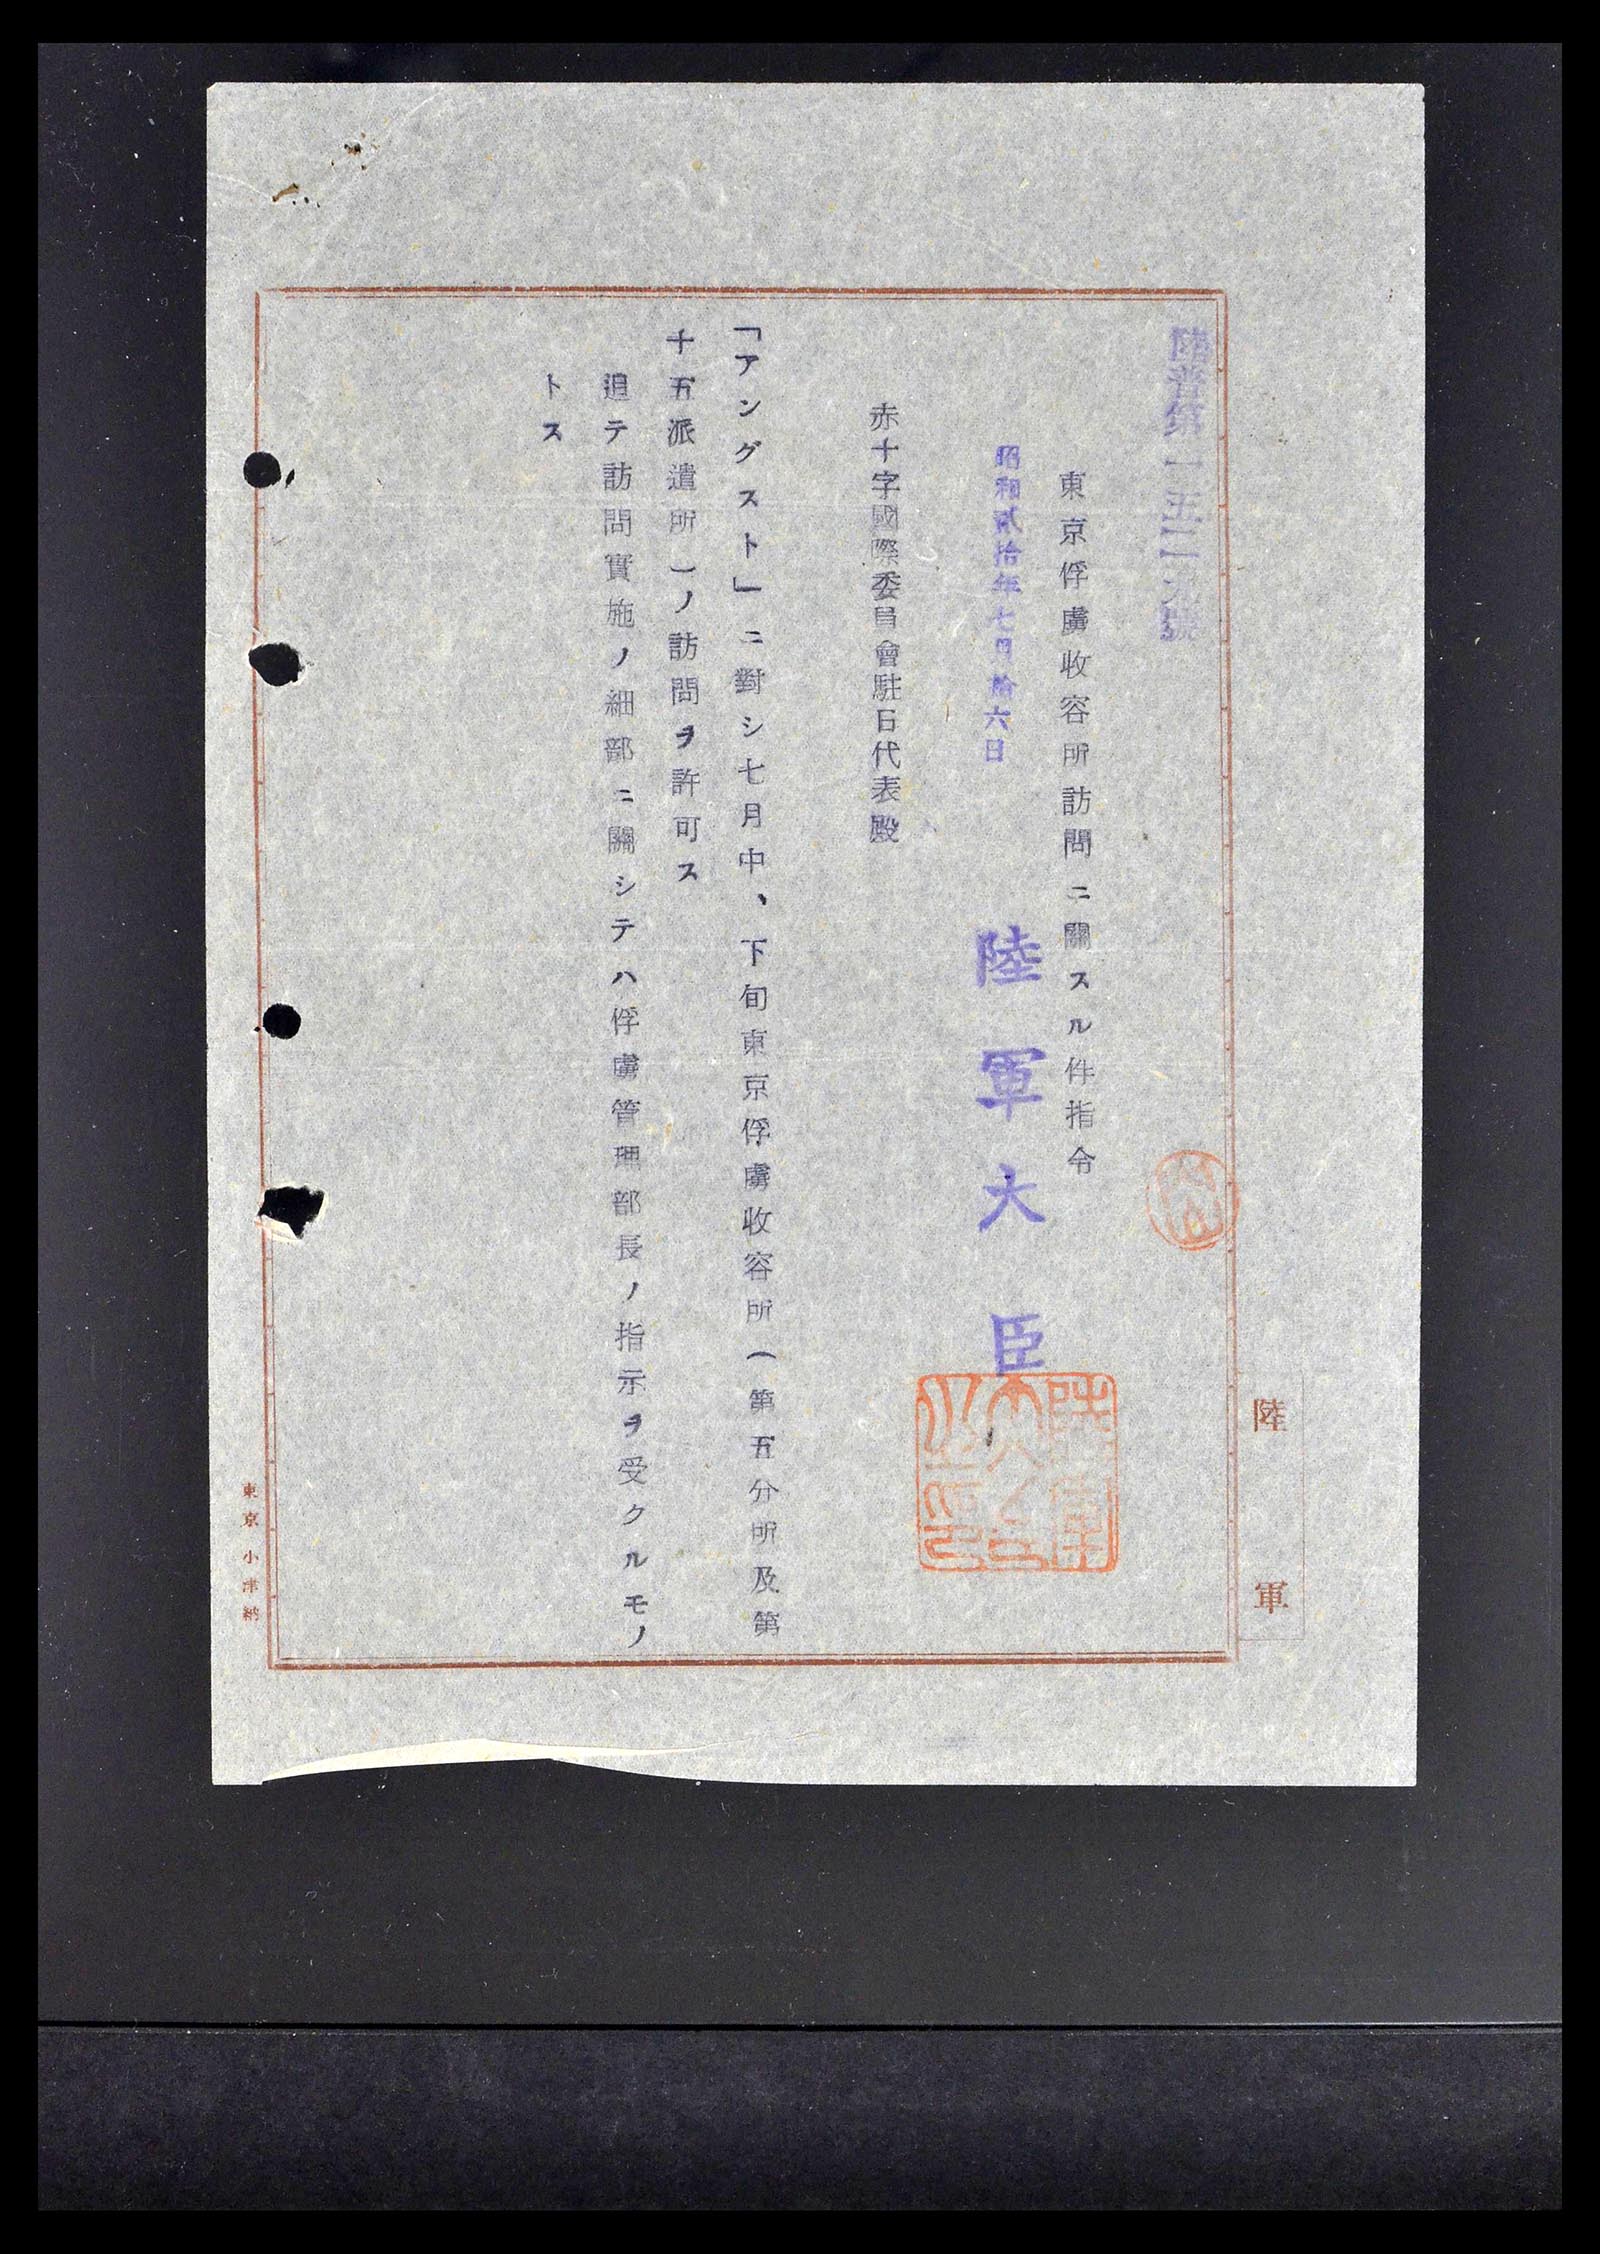 39168 0011 - Stamp collection 39168 Japan WW II 1943-1945.